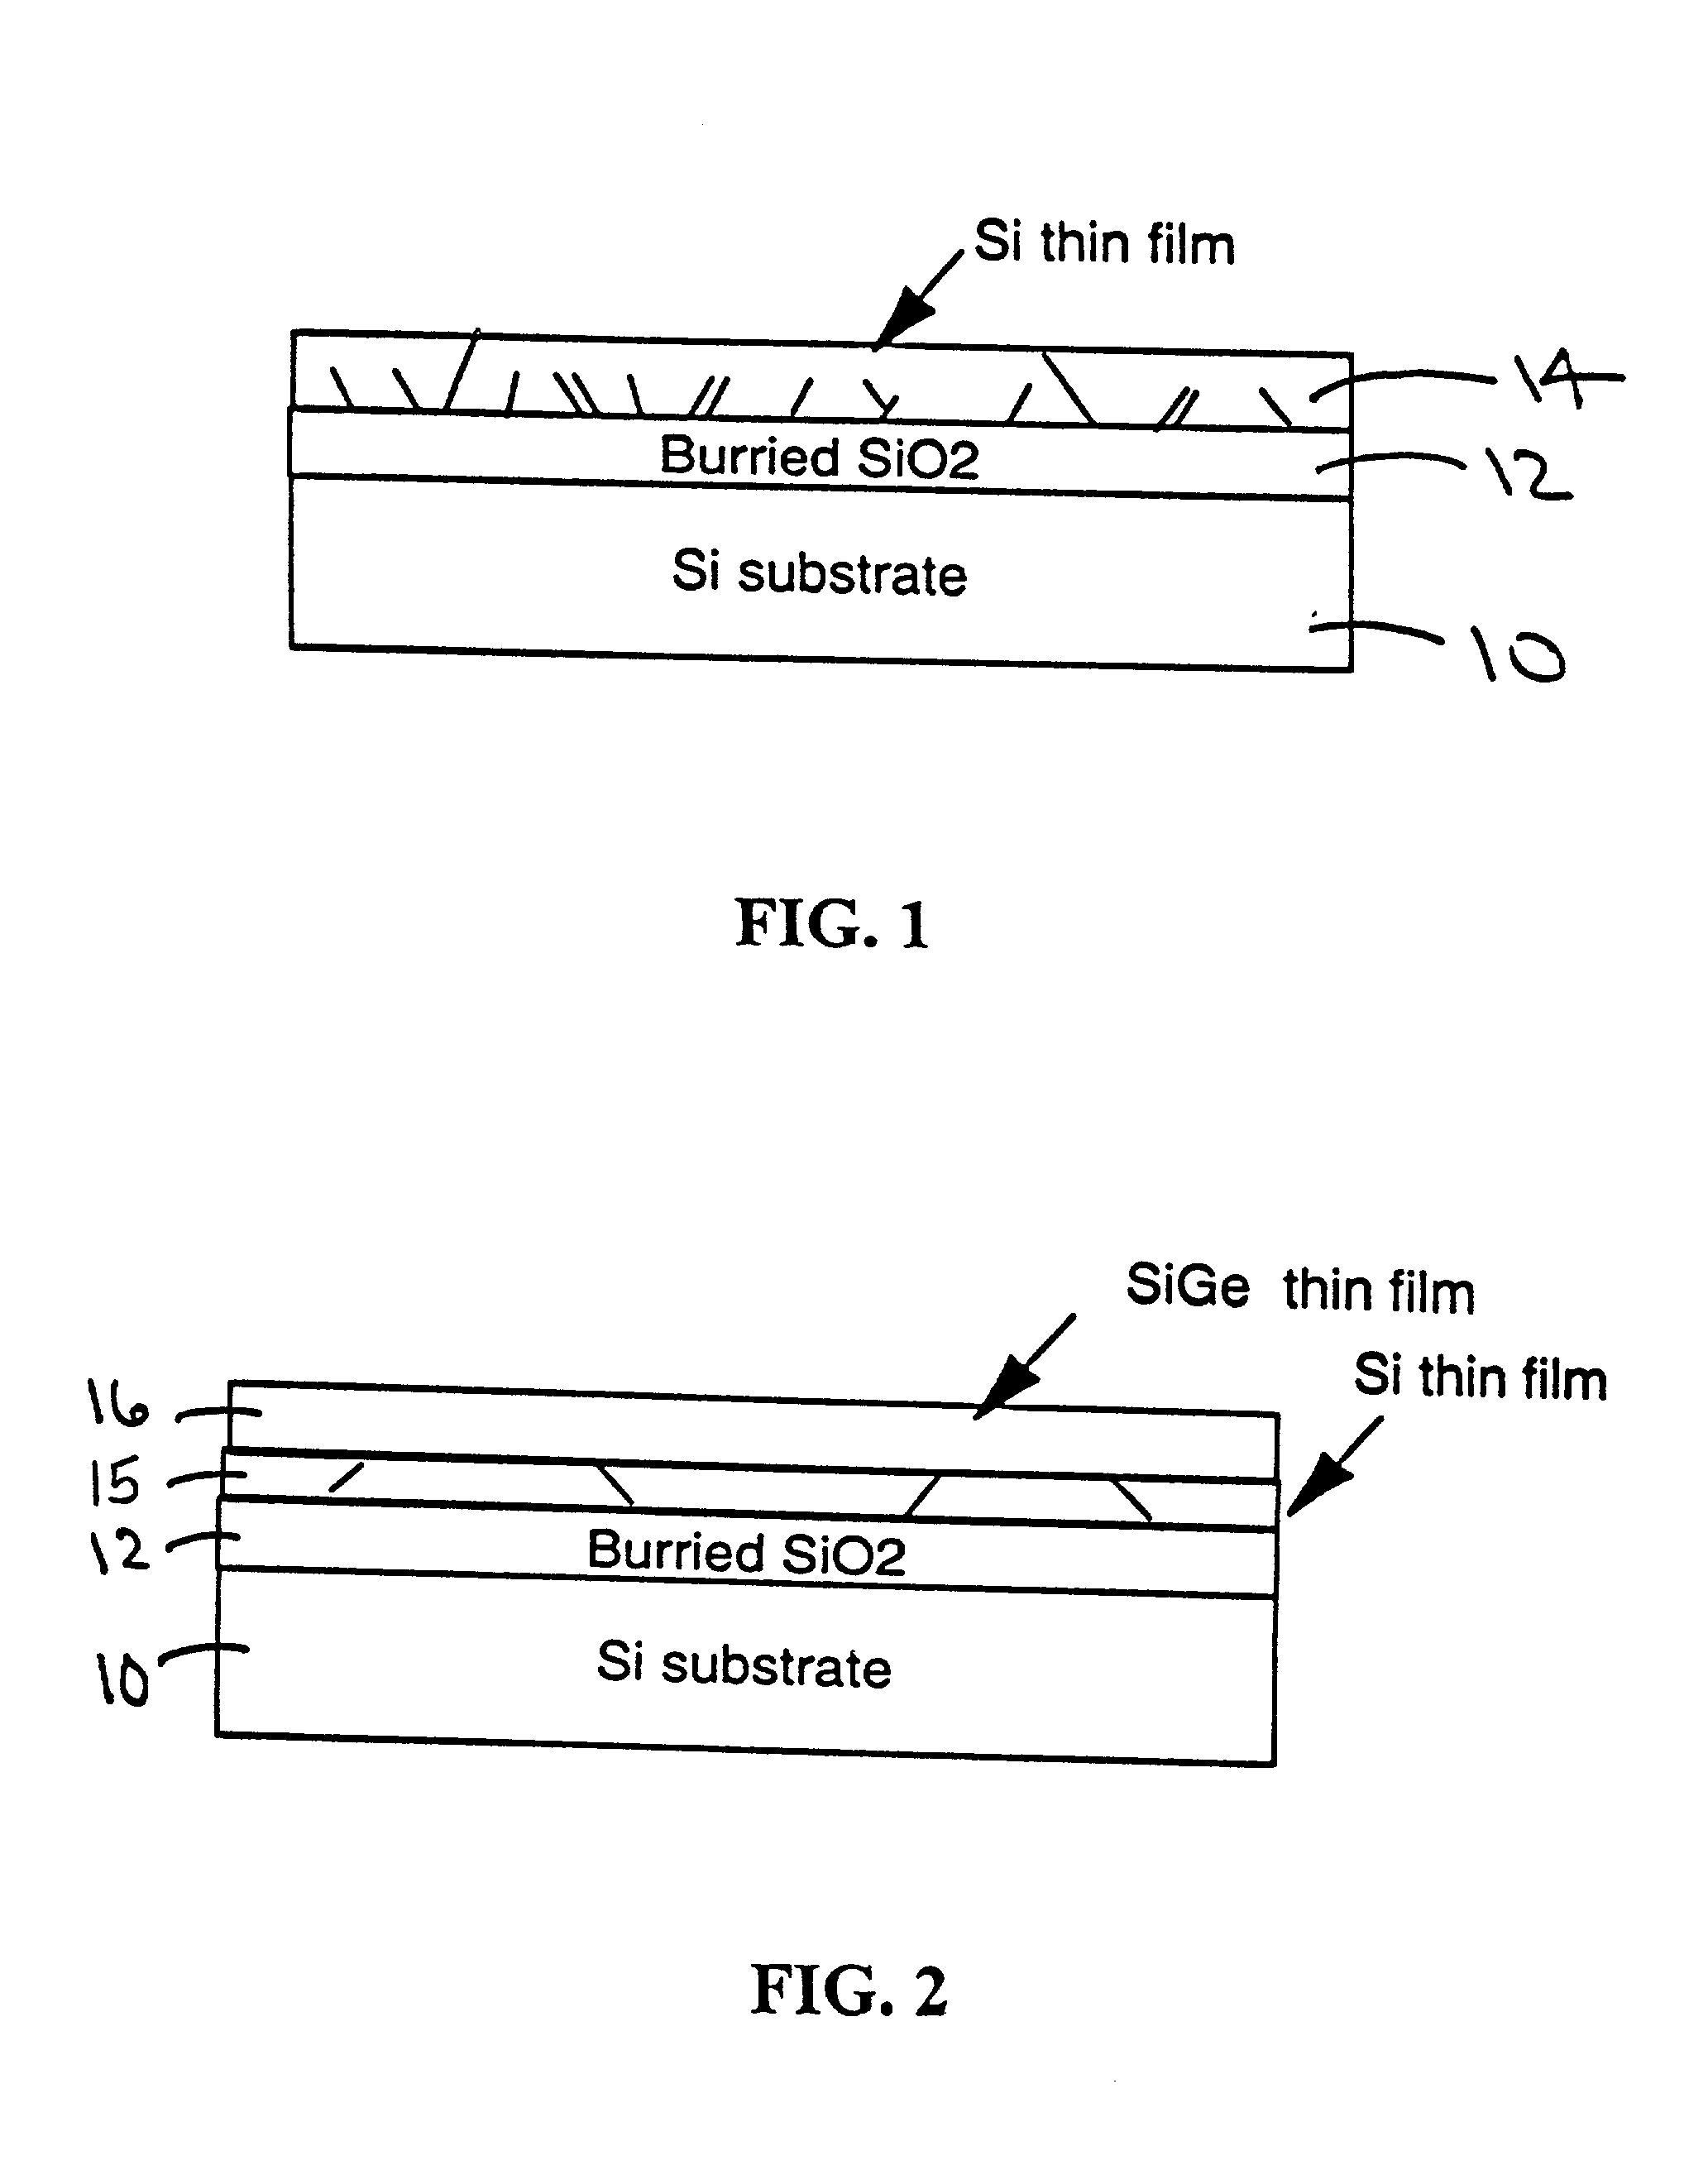 Processing method for forming dislocation-free silicon-on-insulator substrate prepared by implantation of oxygen